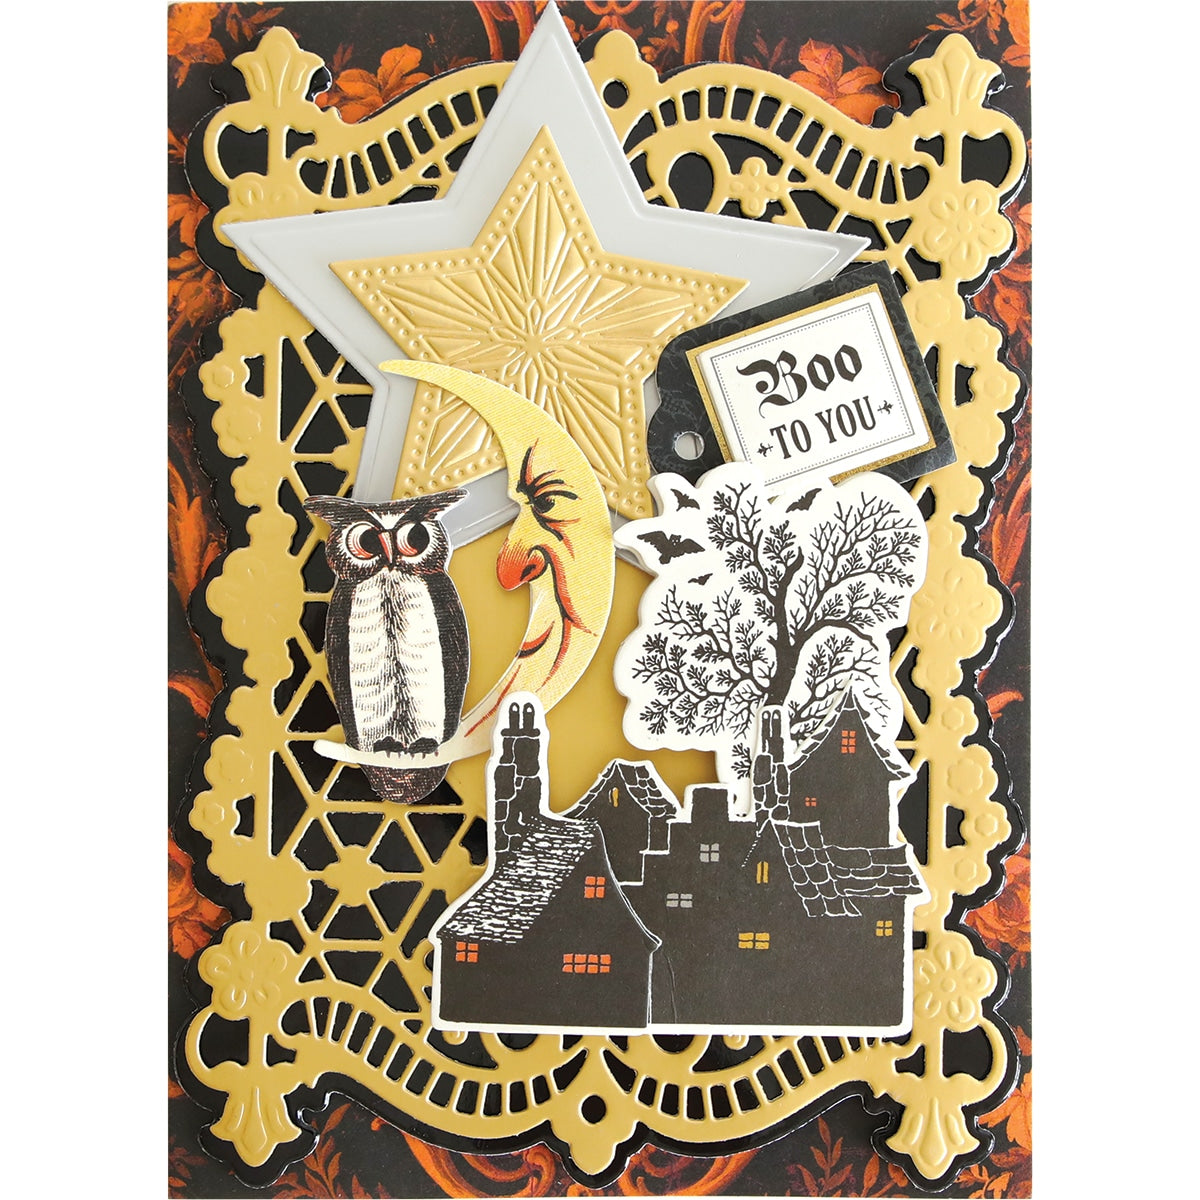 a card with an owl and a star on it.